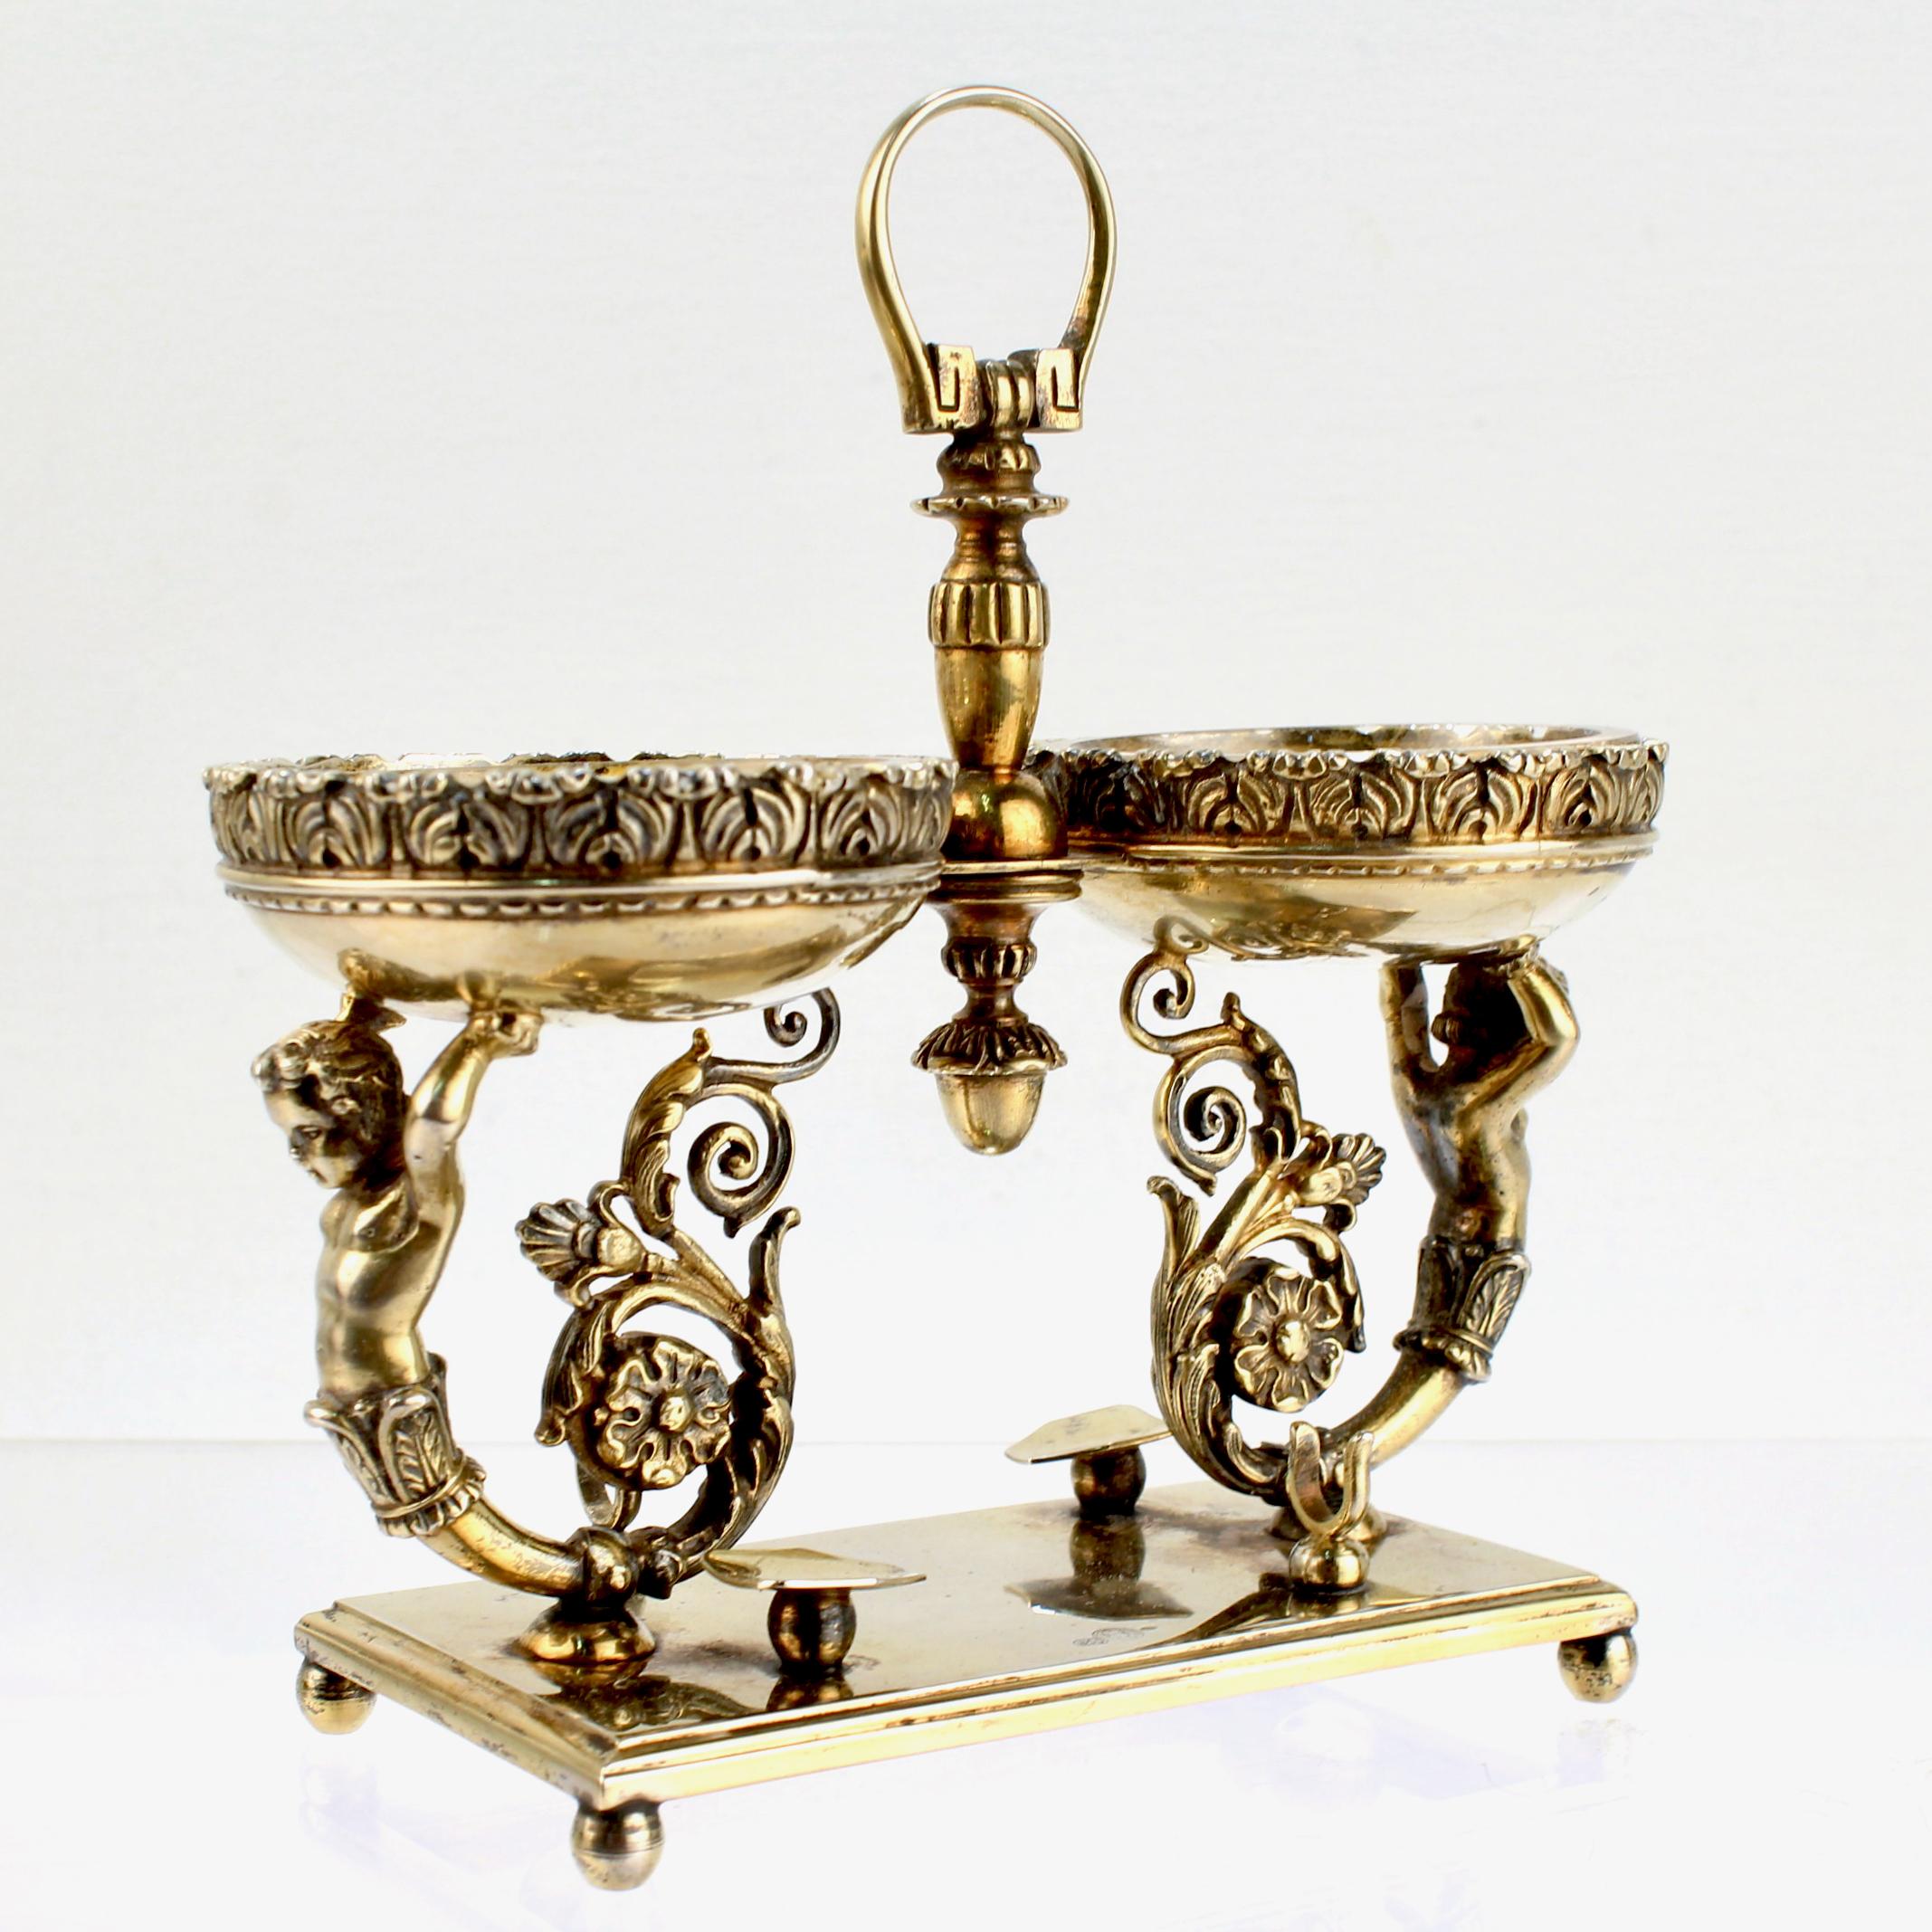 Vintage Rococo Style Figural Italian Gilt Silver Double Caviar Stand or Server For Sale 3